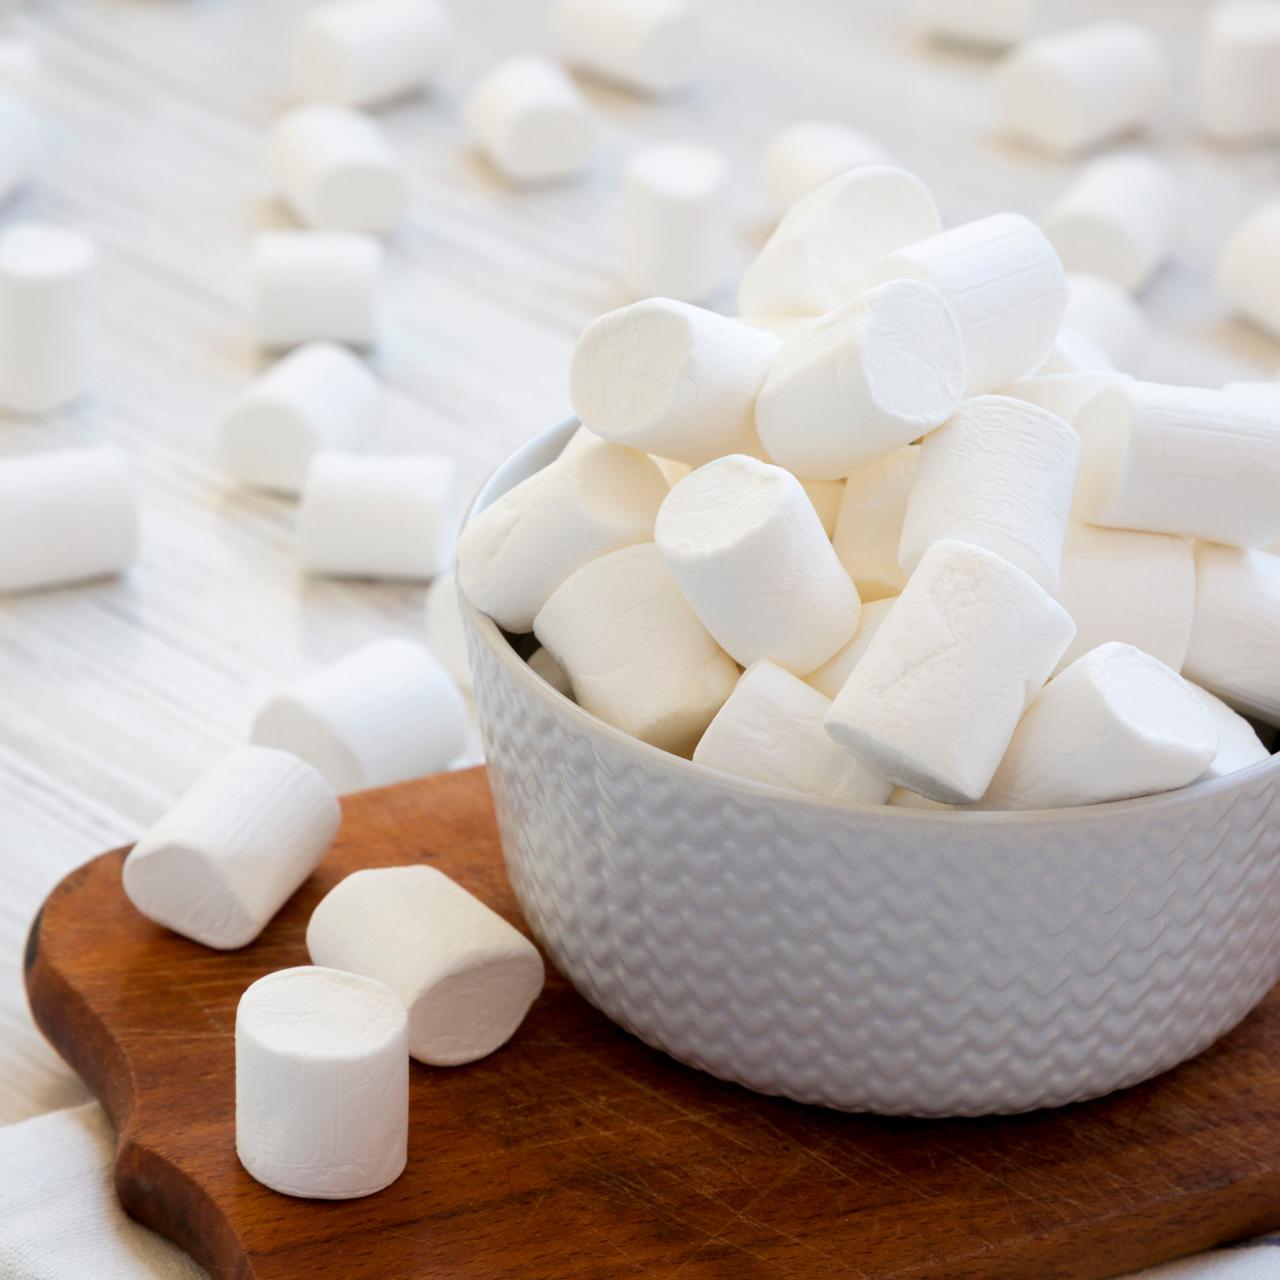 What Are Marshmallows Made Of?, Cooking School